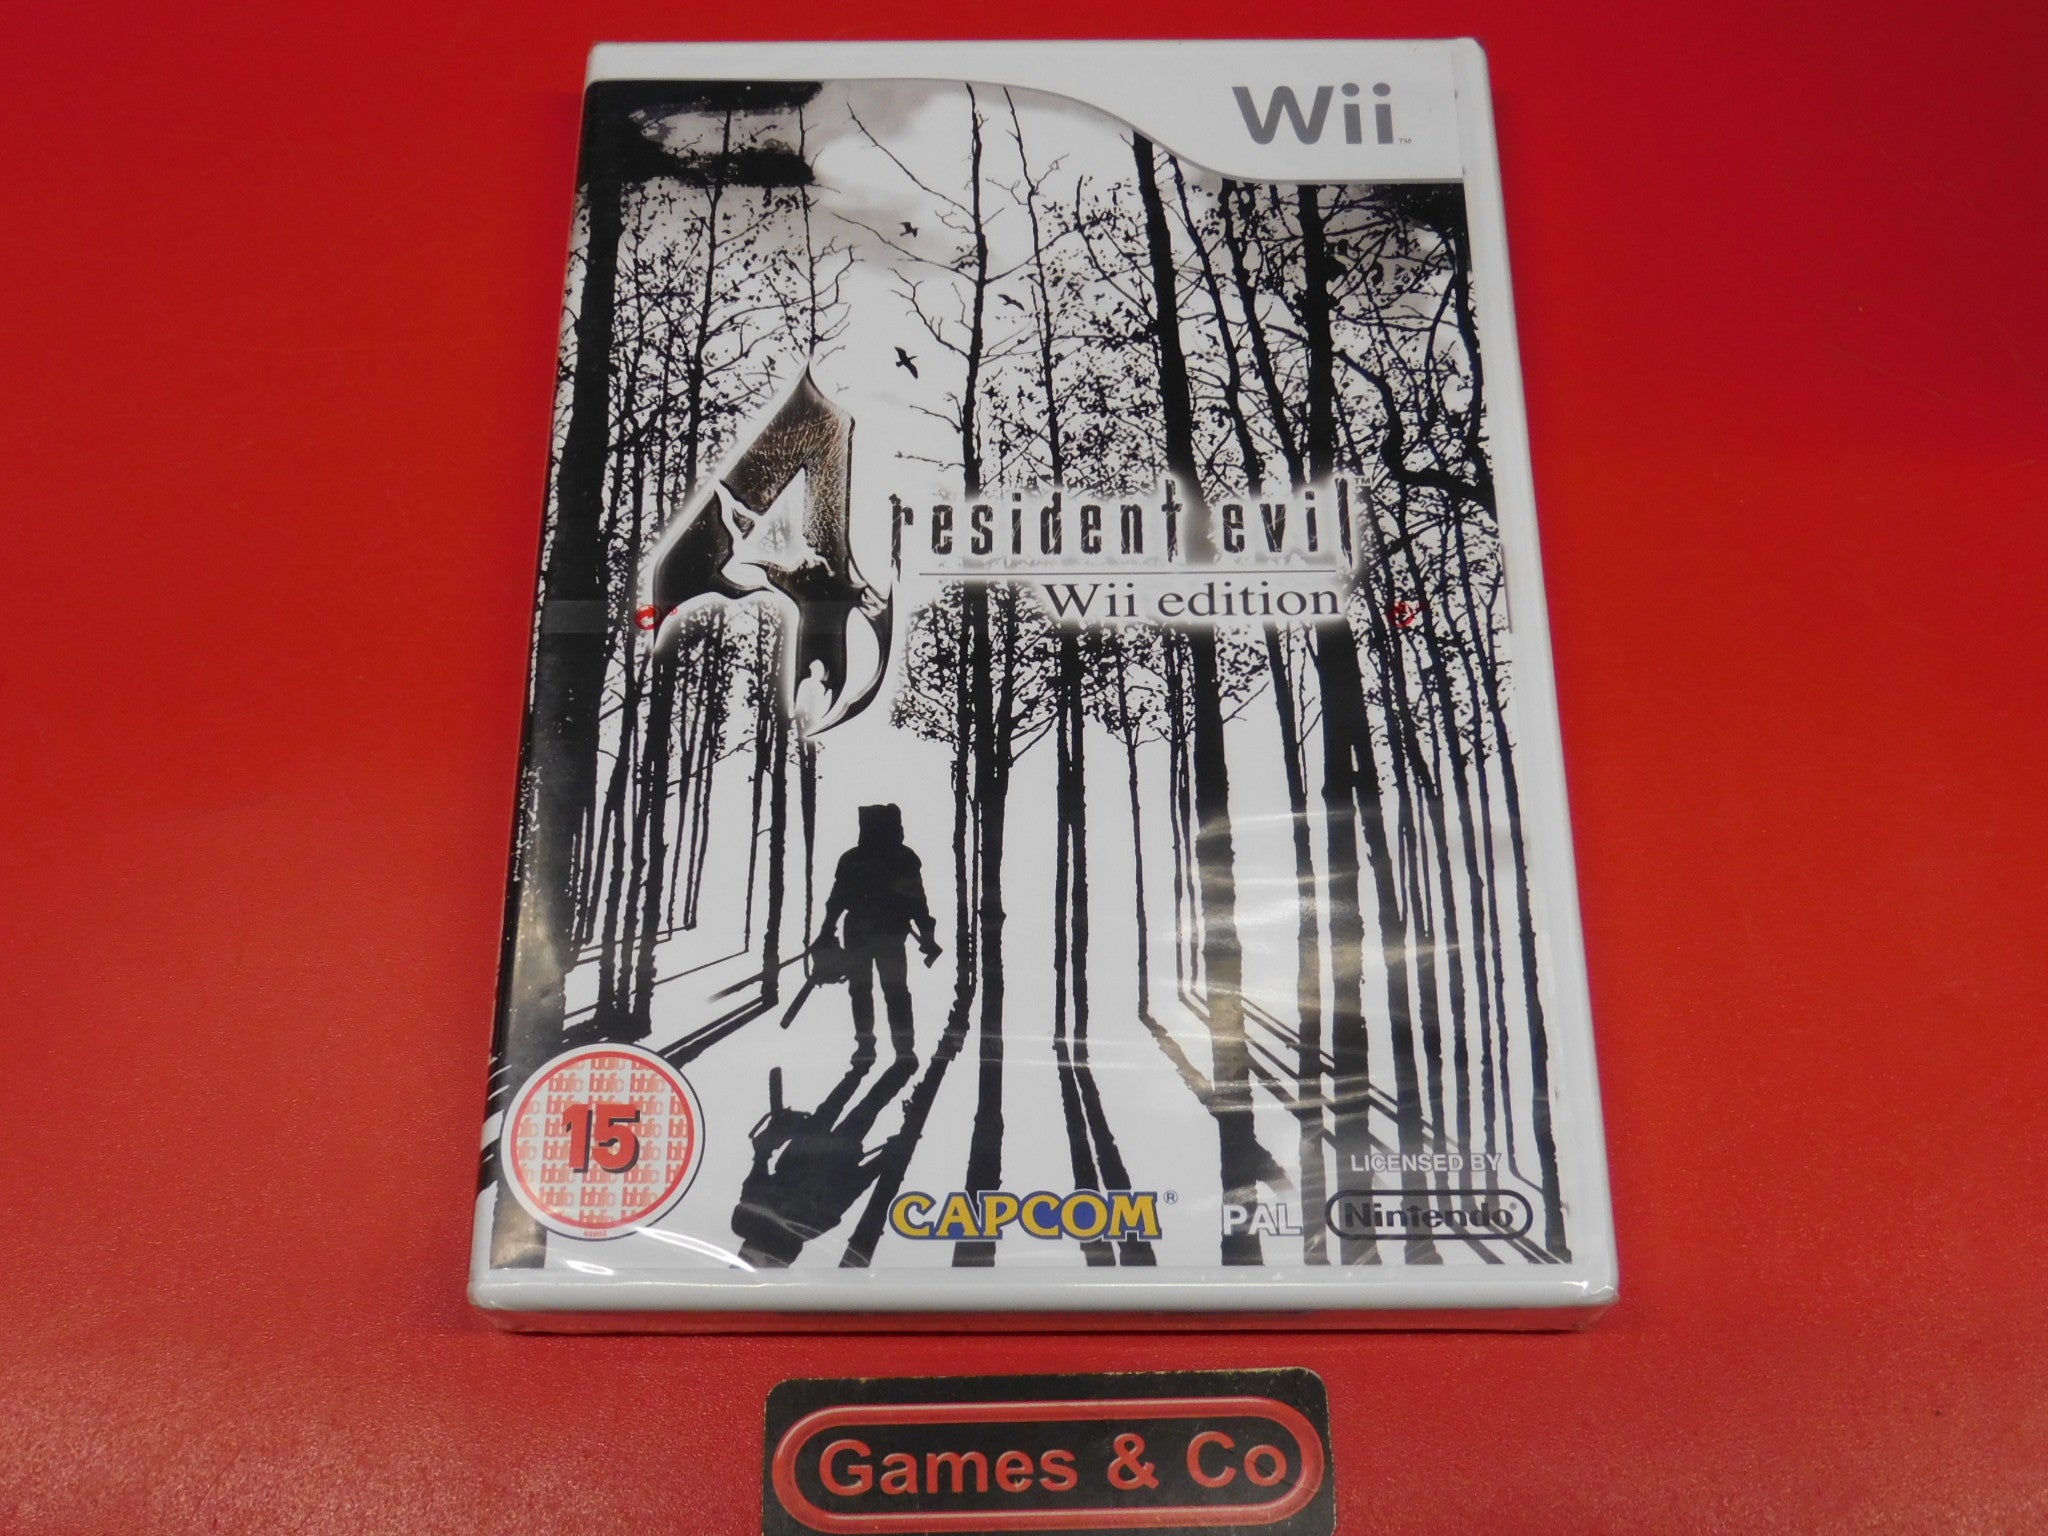 RESIDENT EVIL 4 Wii EDITION